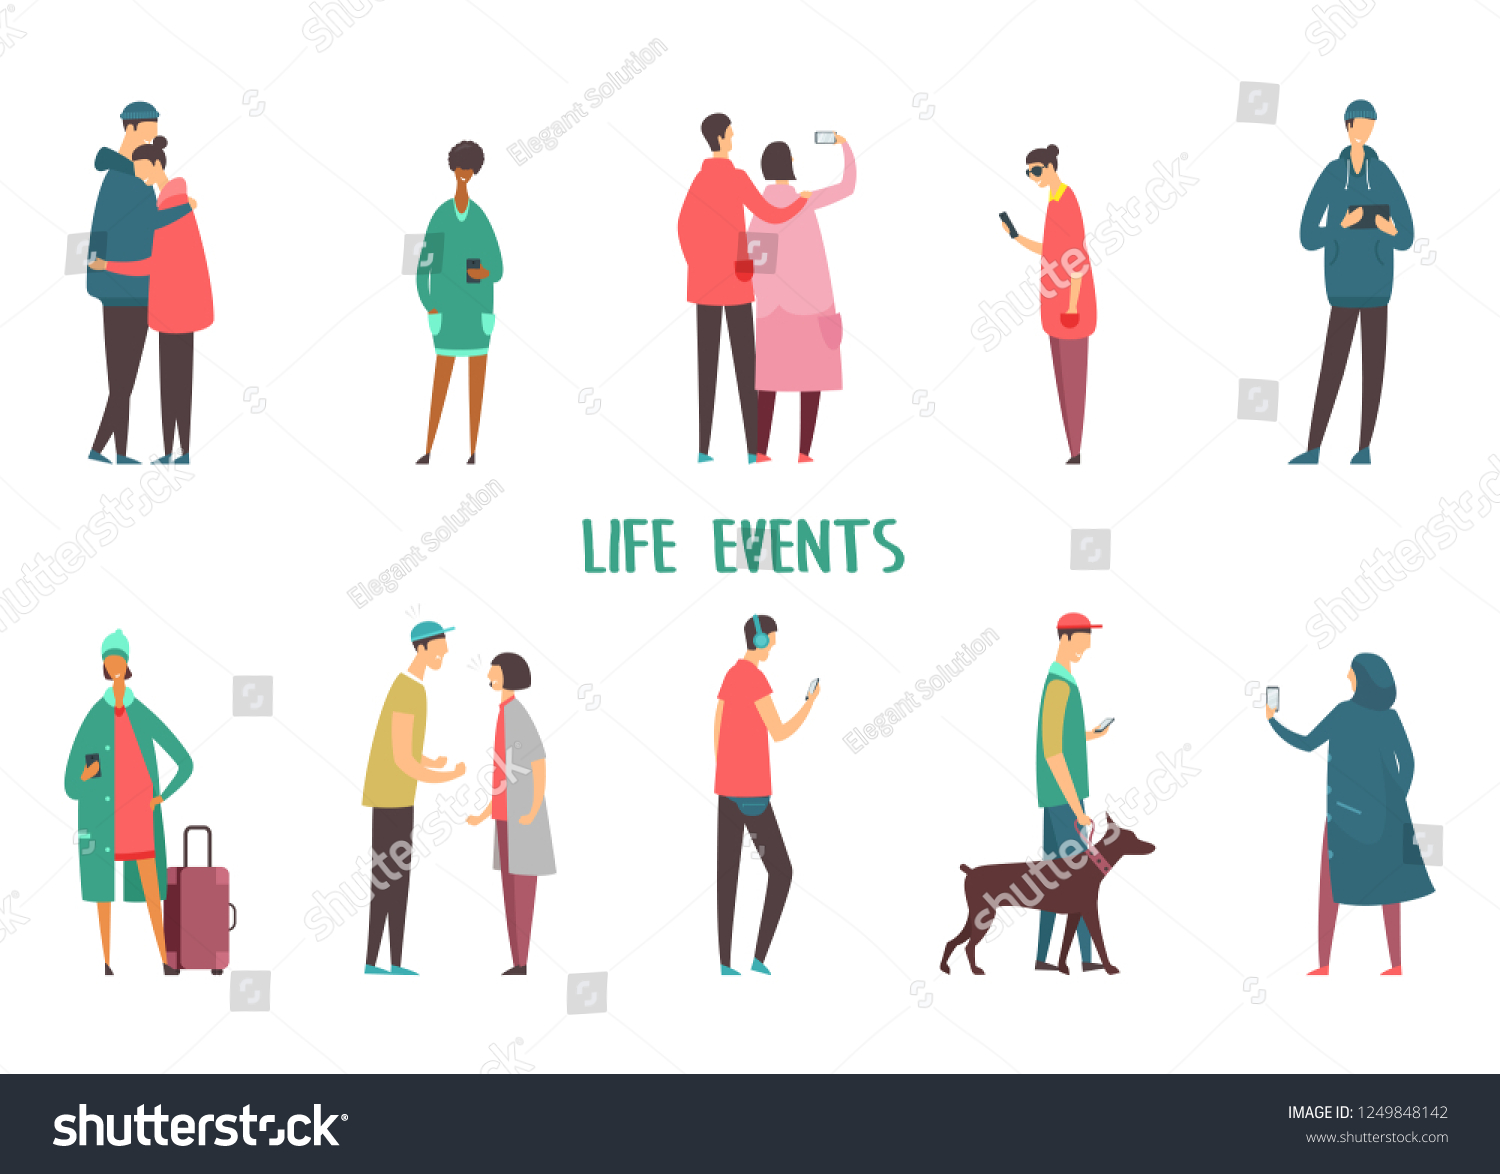 Set of isolated people icons at walk. Couple taking selfie and argue, hugging. Man walking with dog and with tablet, characters with smartphone, woman using phone for chatting. Life events, stroll #1249848142